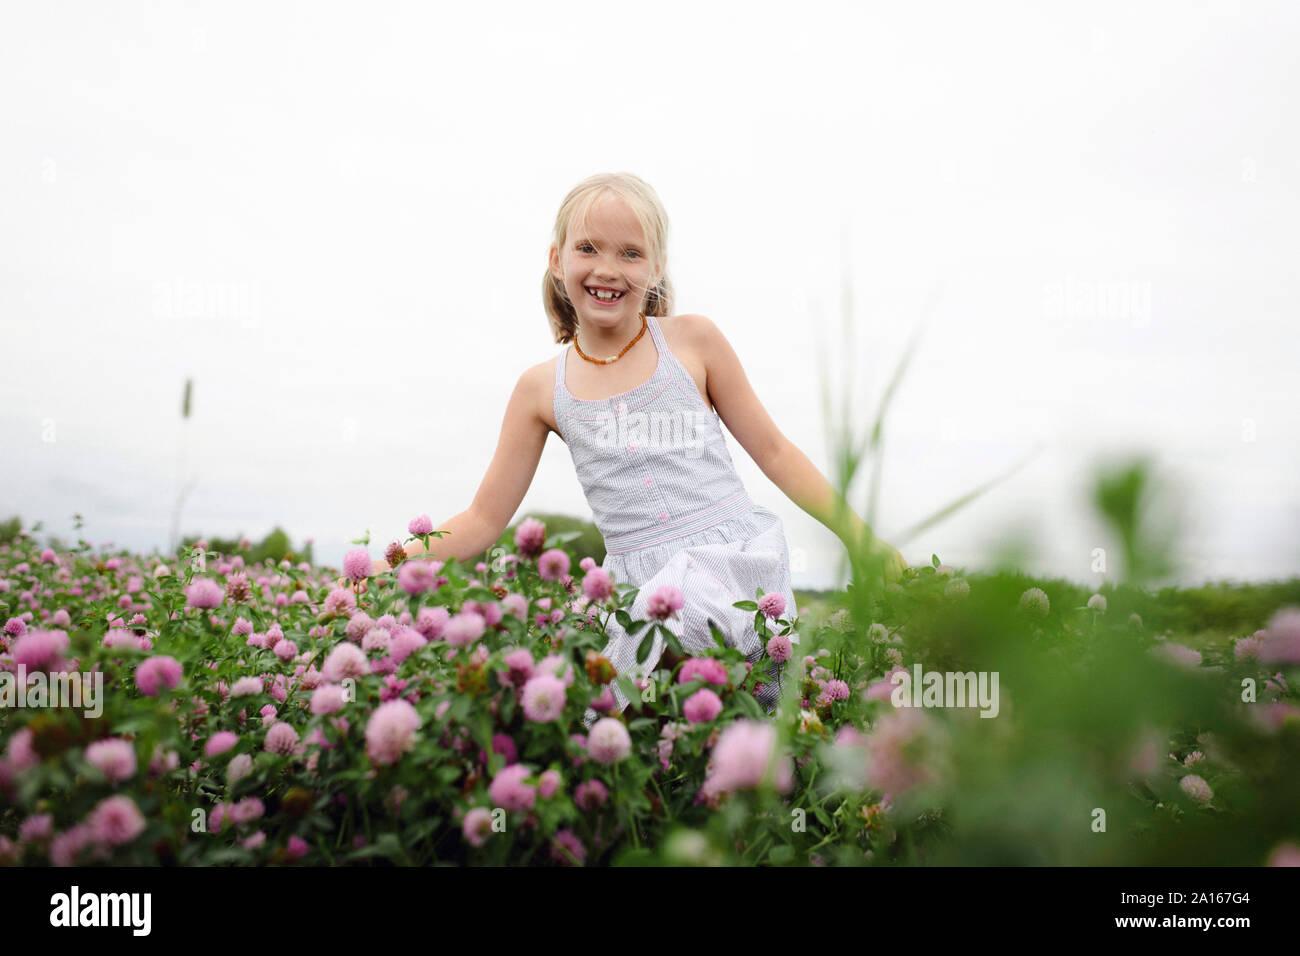 Smiling girl with bunches running on clover field Stock Photo